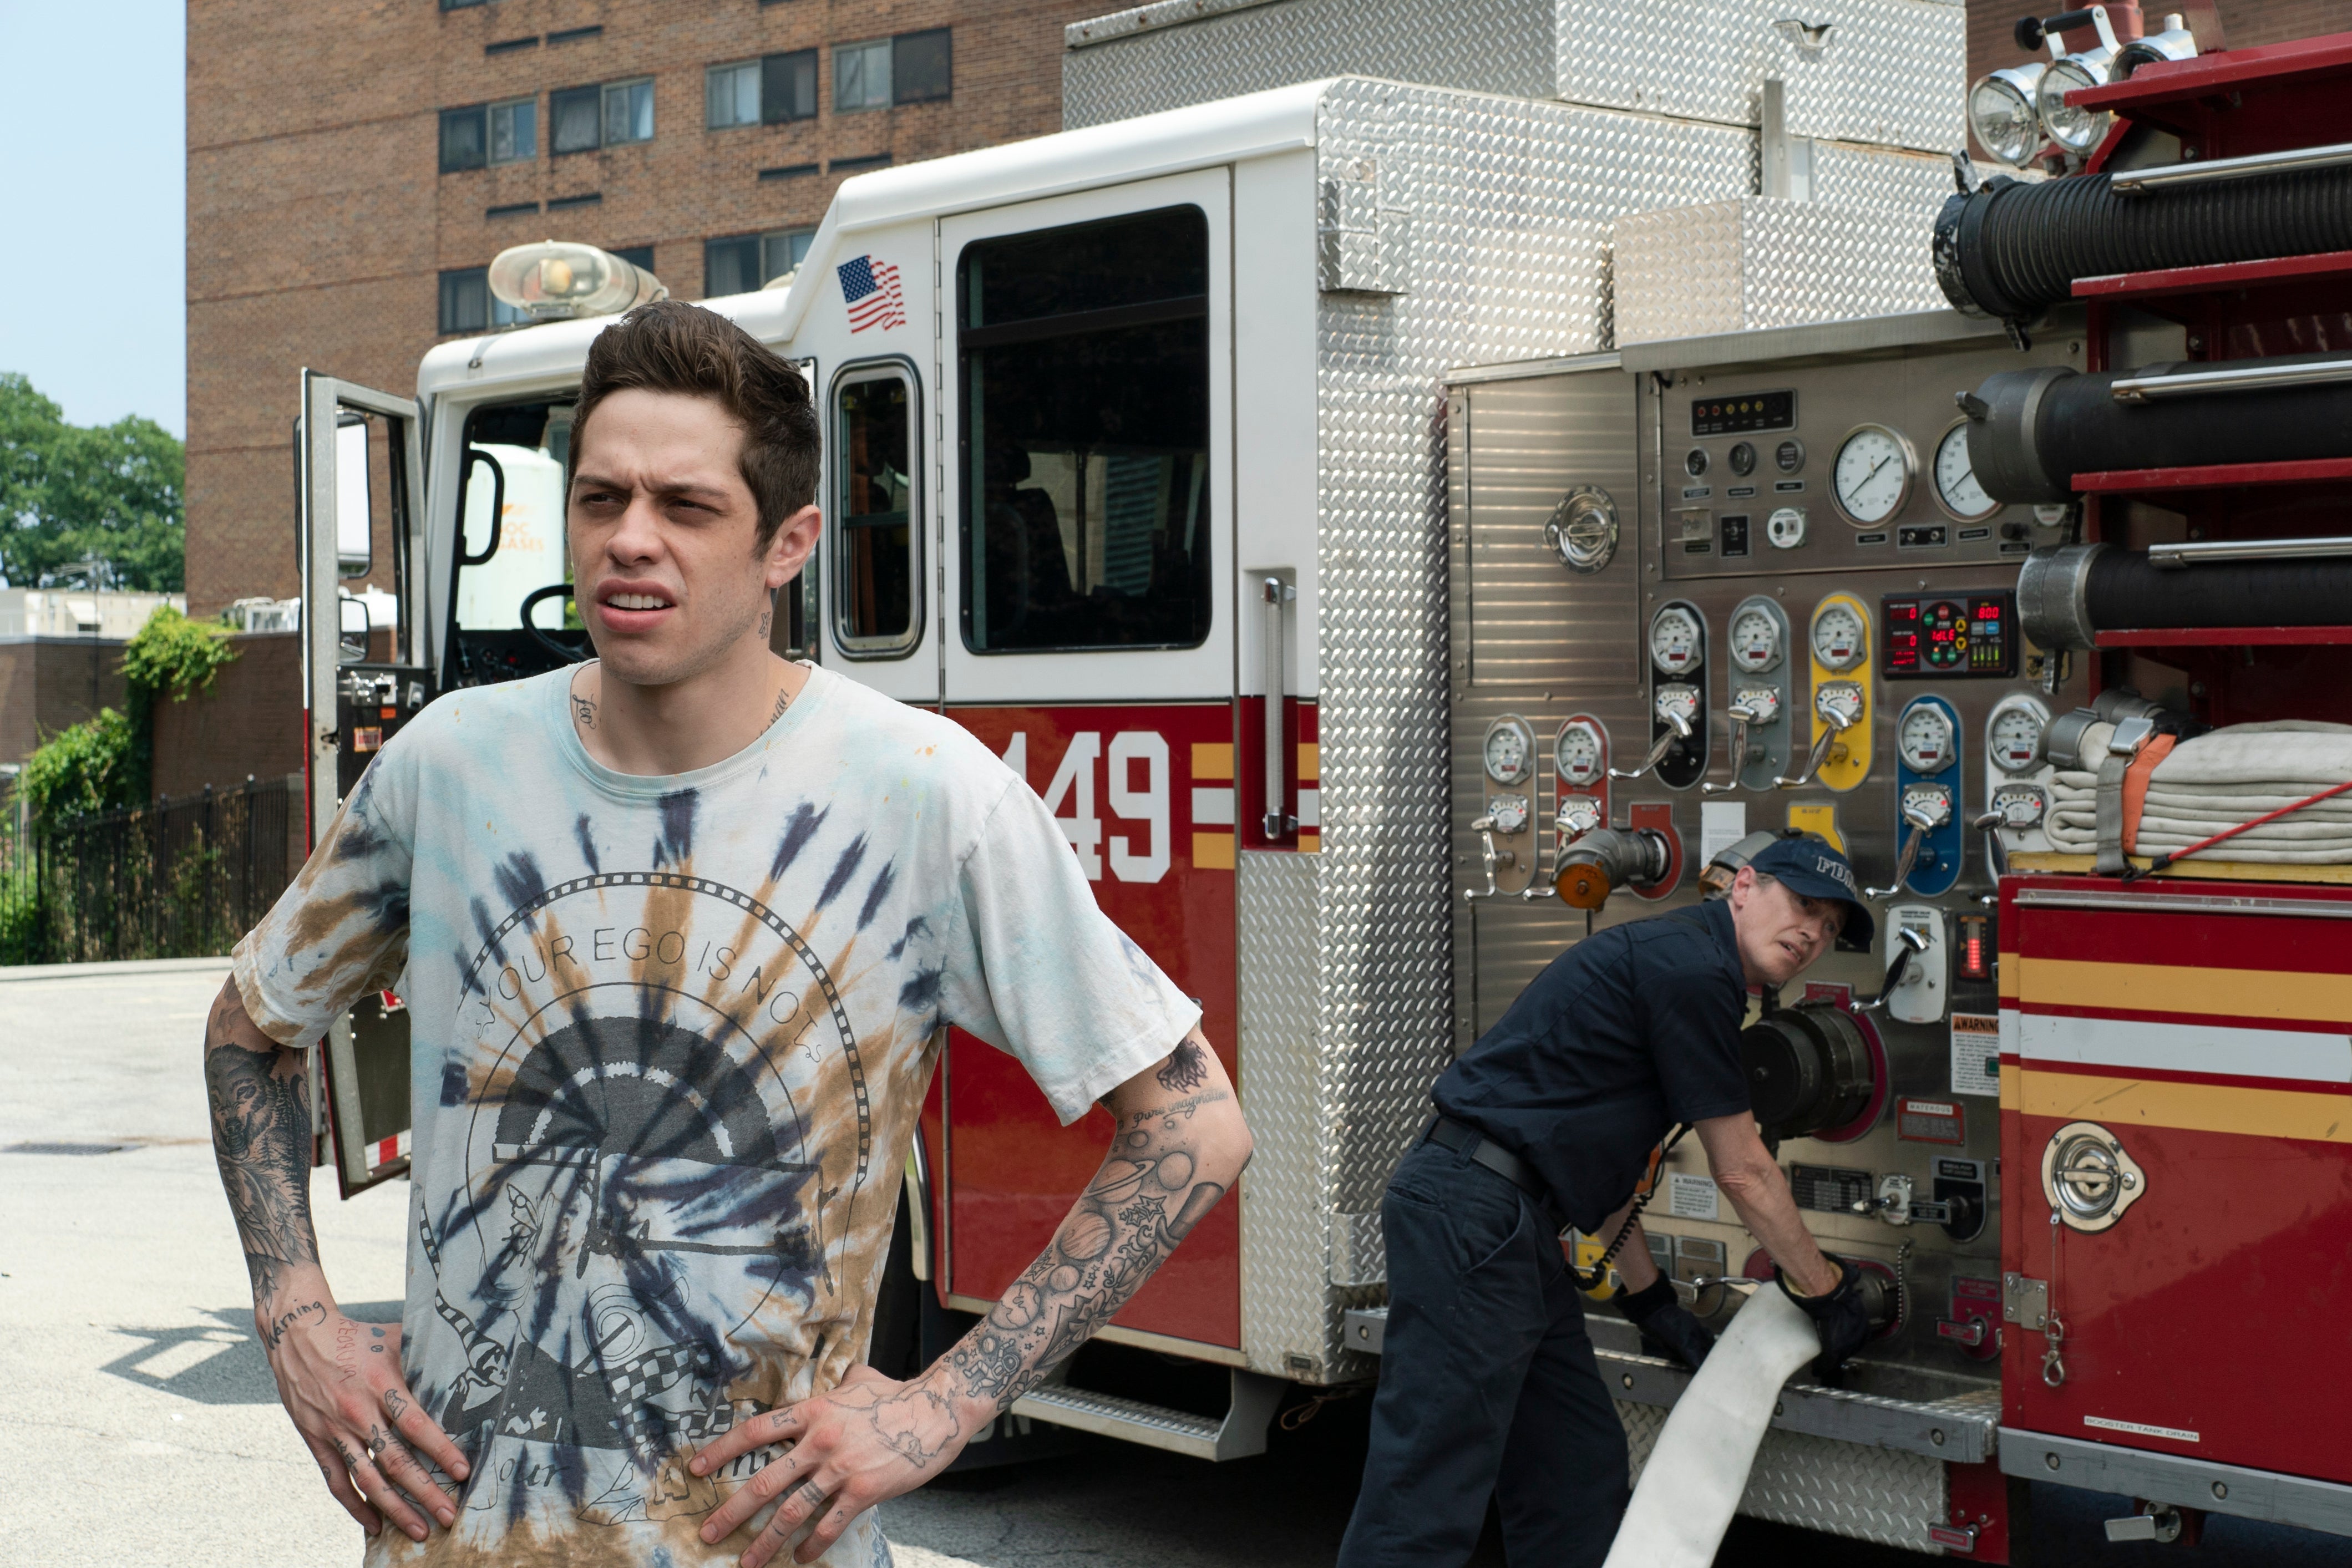 Pete Davidson, hands on hips, stands outside of a firehouse.